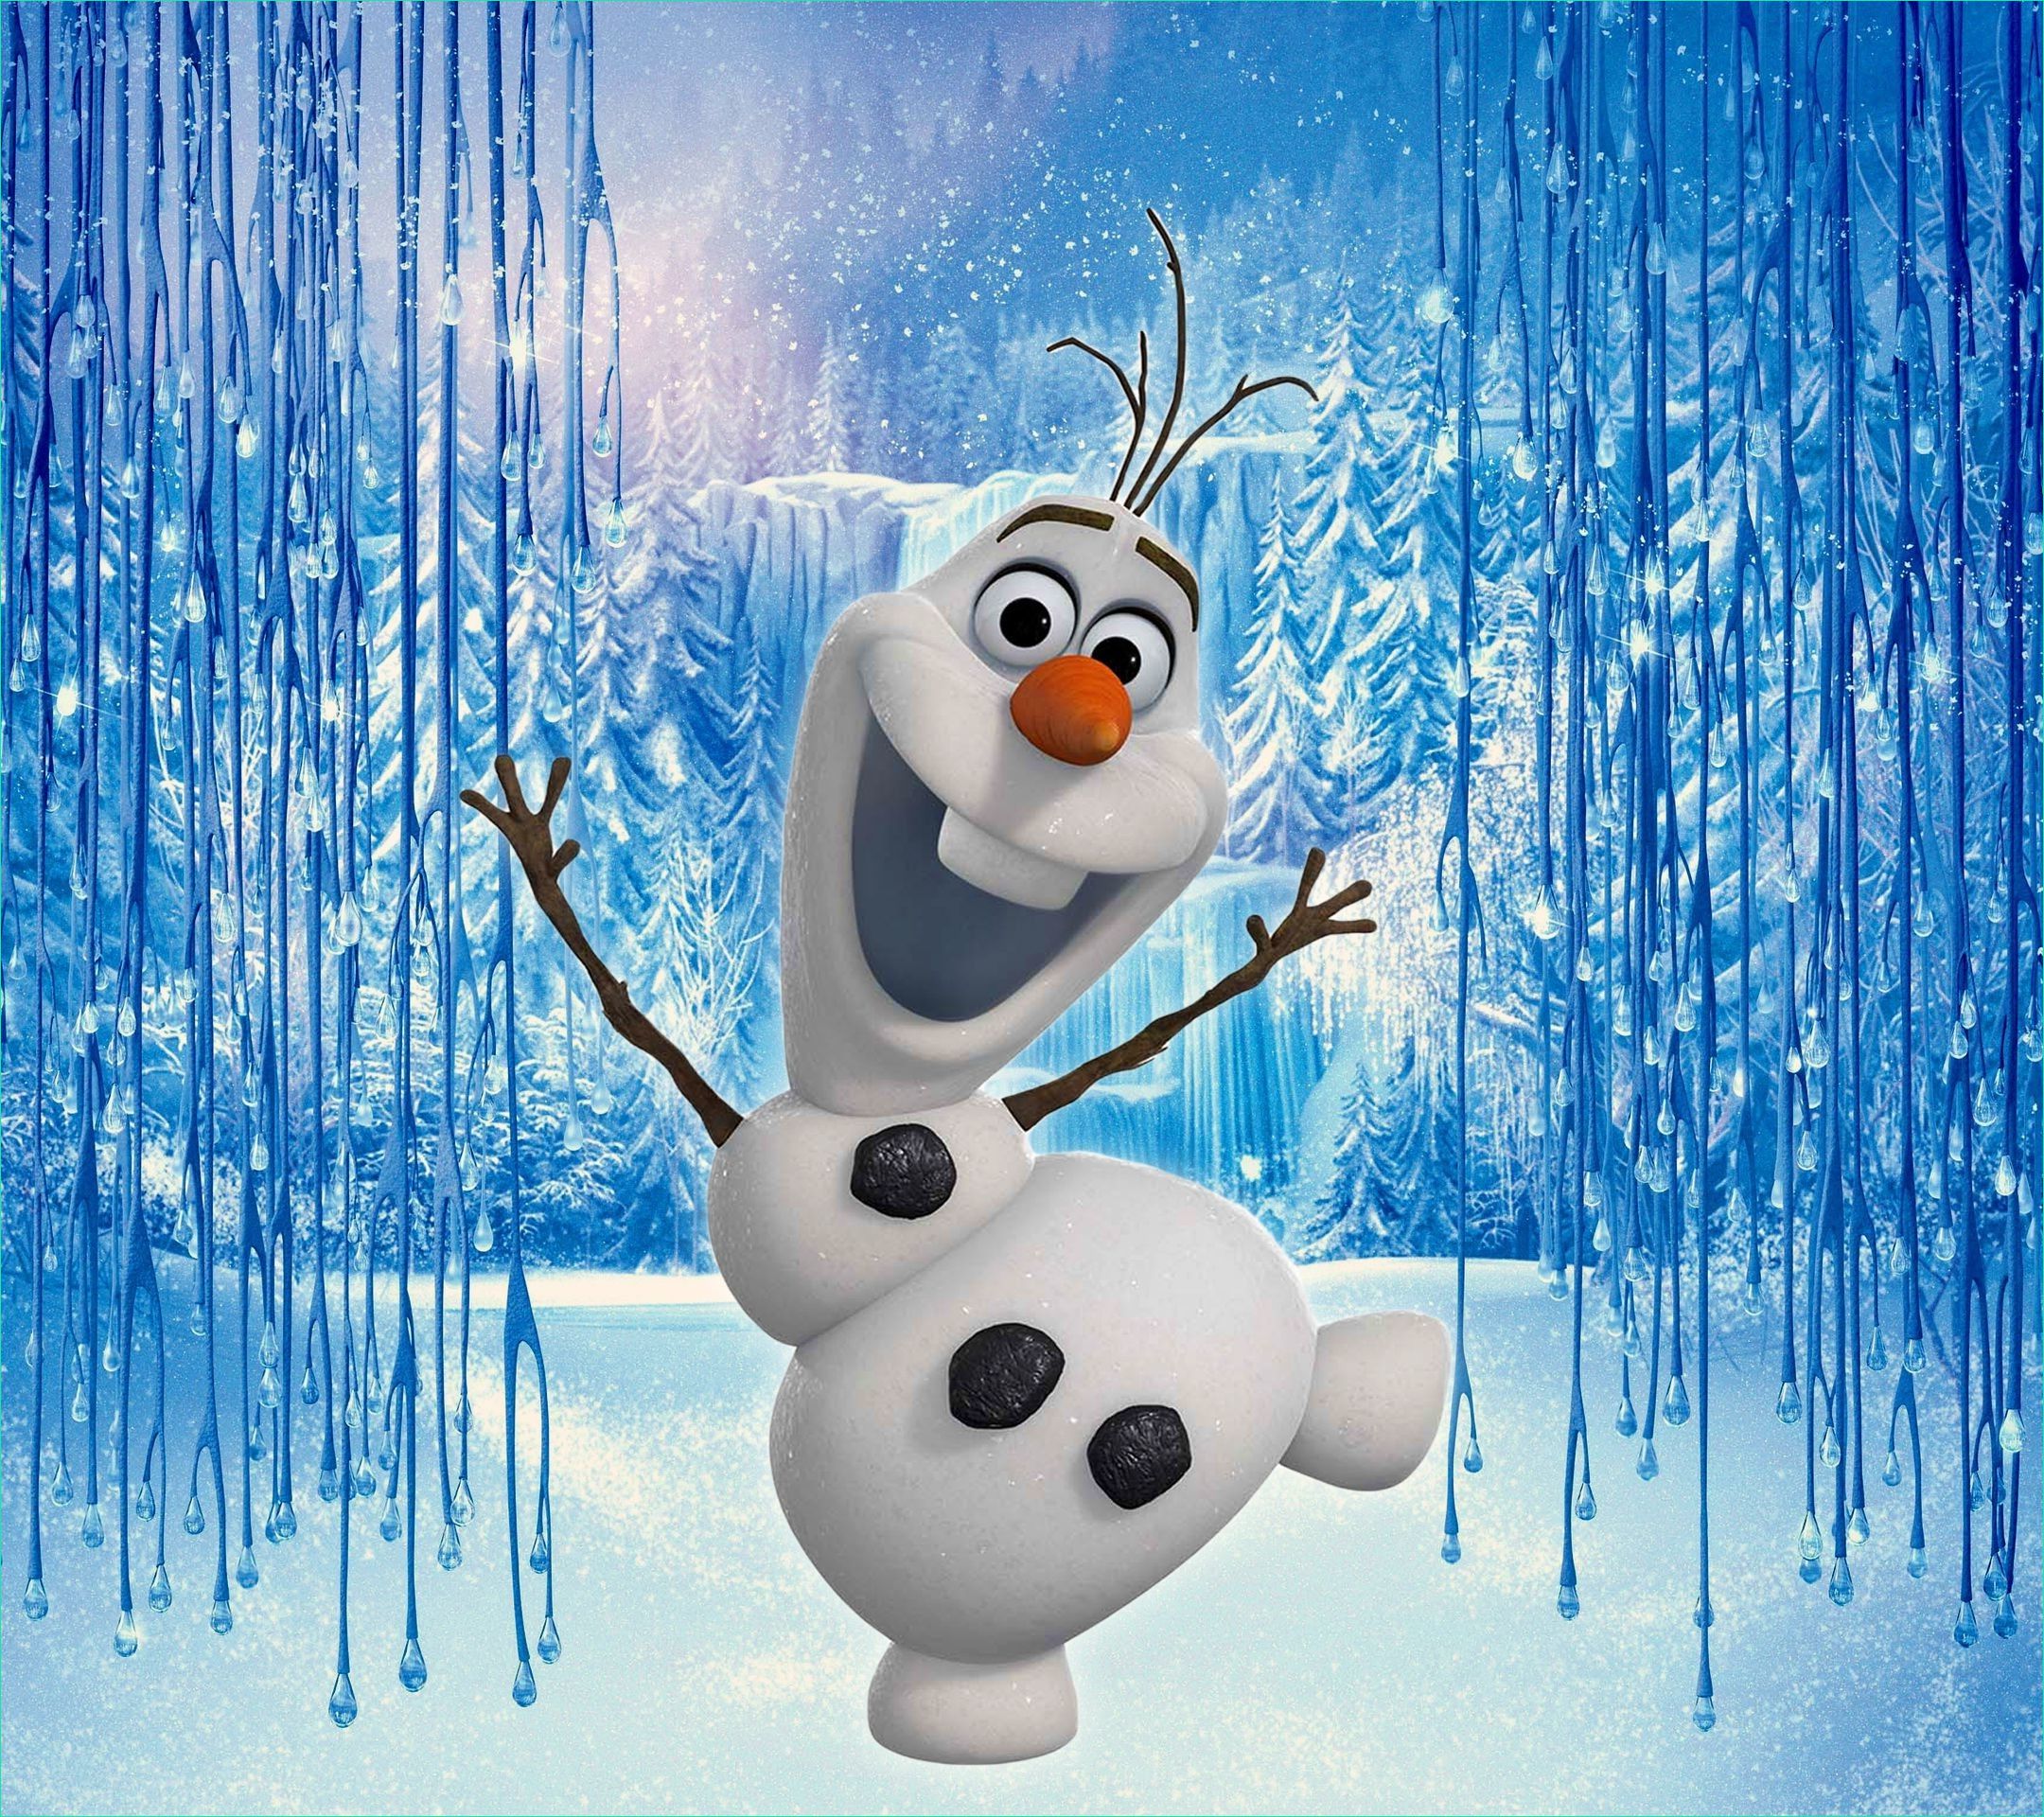 Image Olaf Bestof Photos Olaf From Frozen Wallpaper 70 Images